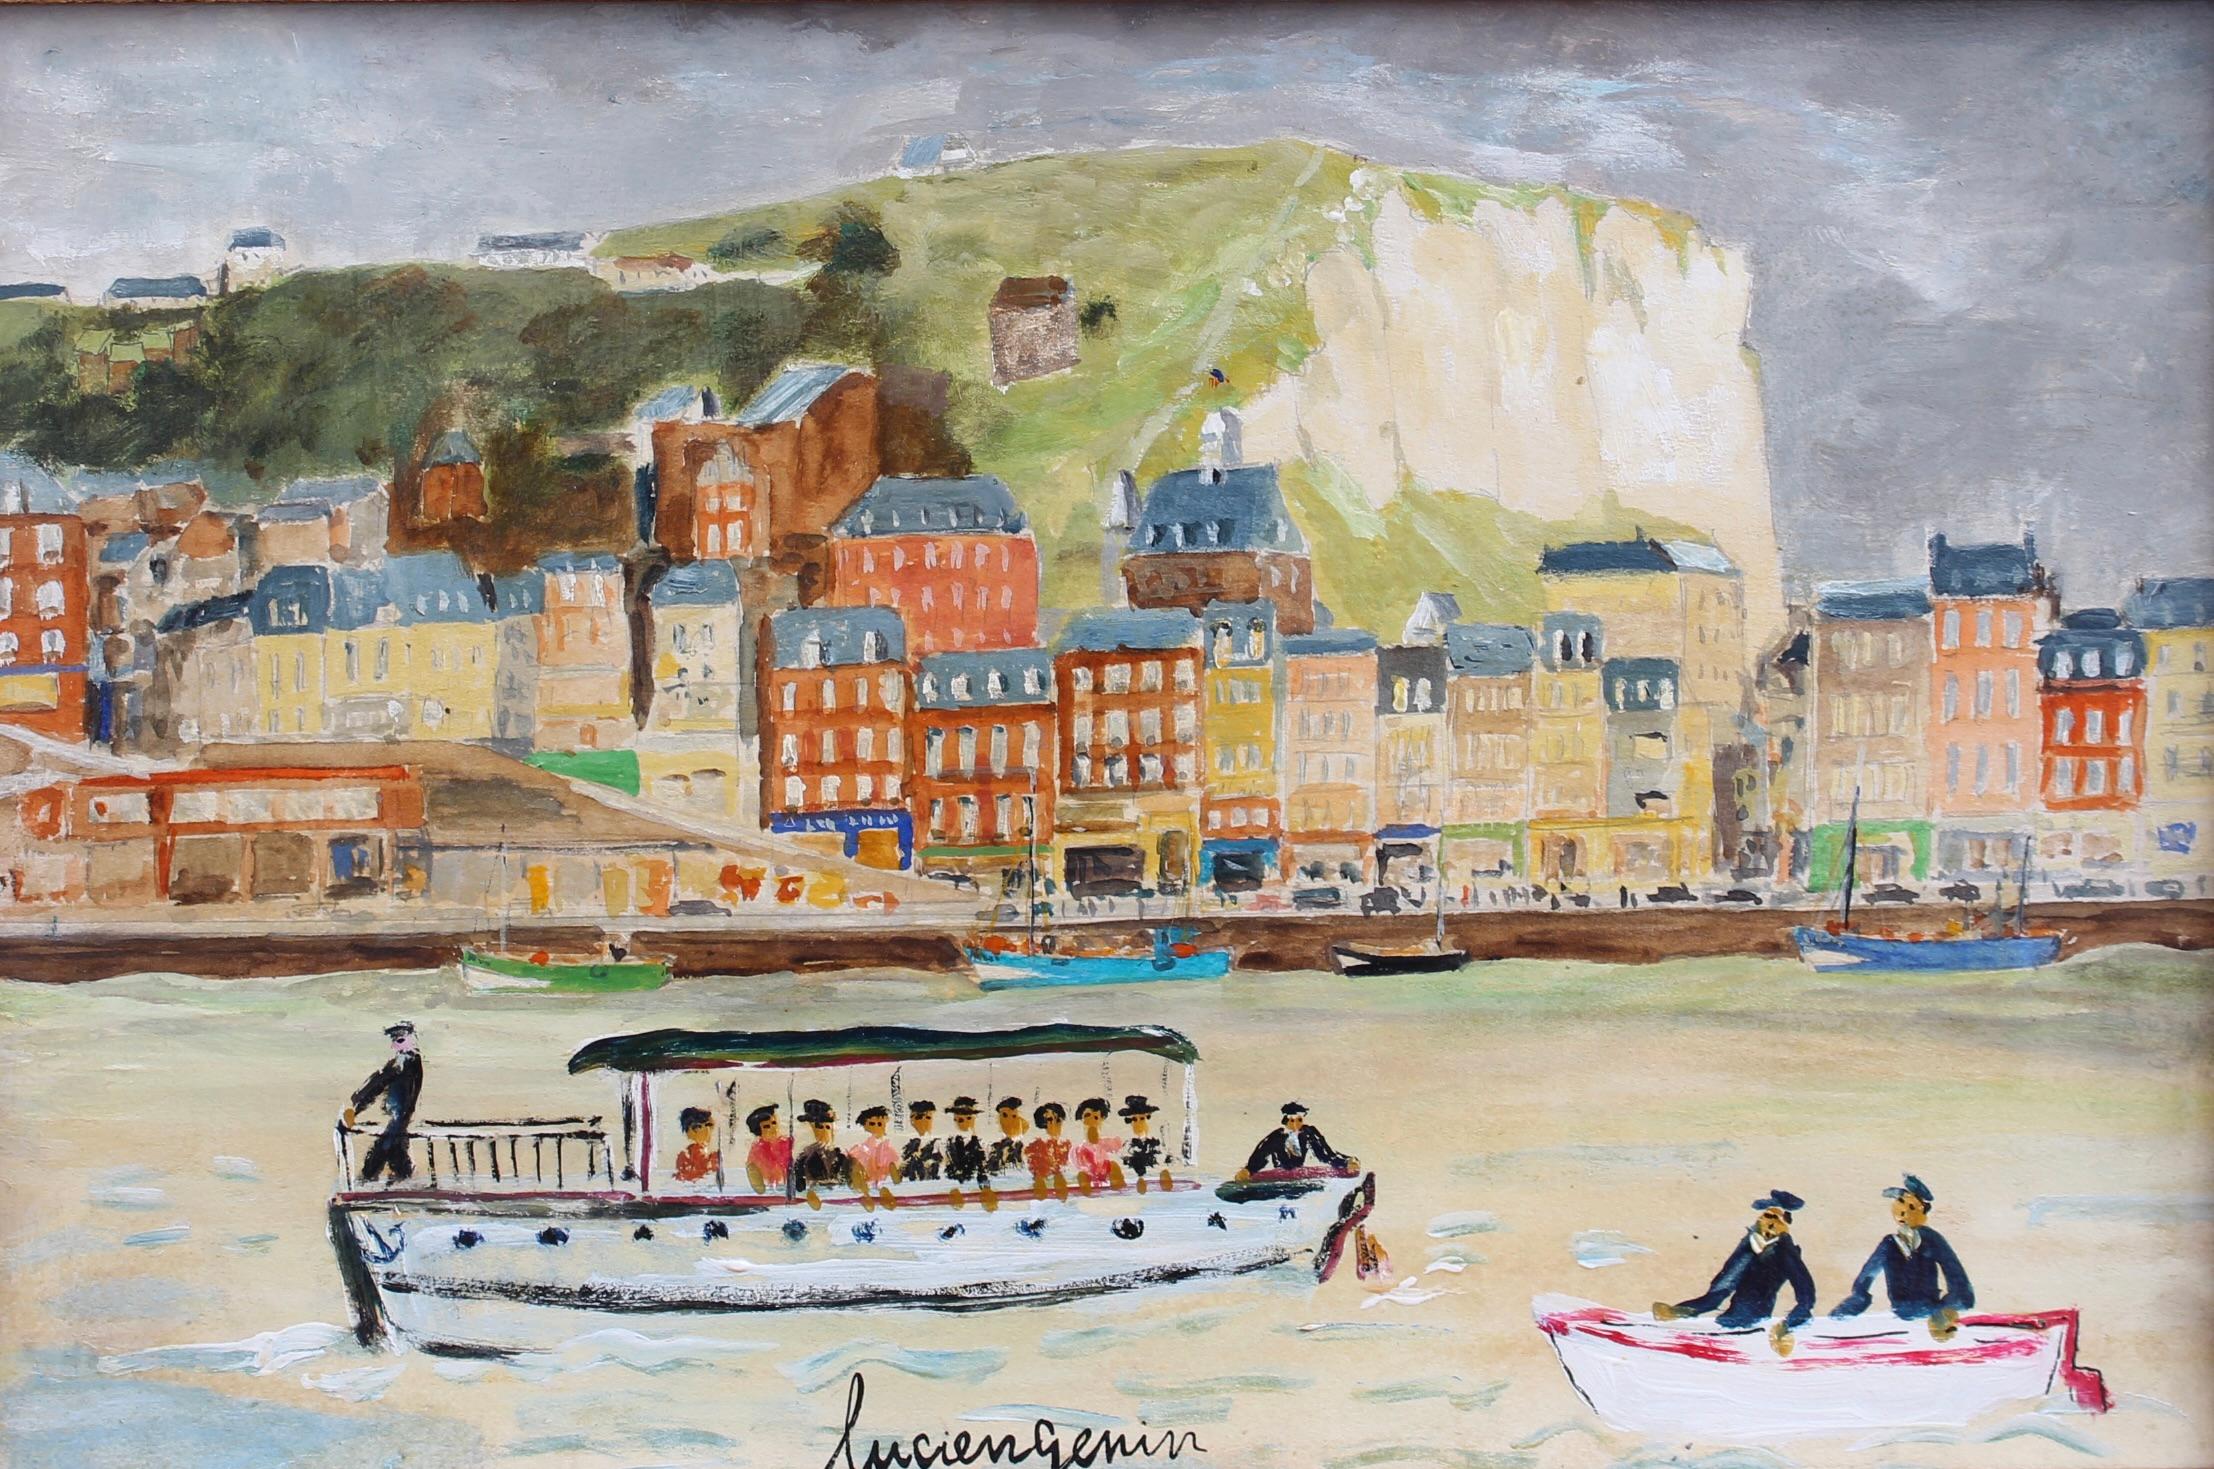 'The Seaside Resort of Dieppe', oil on board, by Lucien Génin (circa 1930s). Located on the scenic French Alabaster Coast, Dieppe has a long and fascinating history of seafaring, known to go back to the Vikings. The port’s name reflects the fact